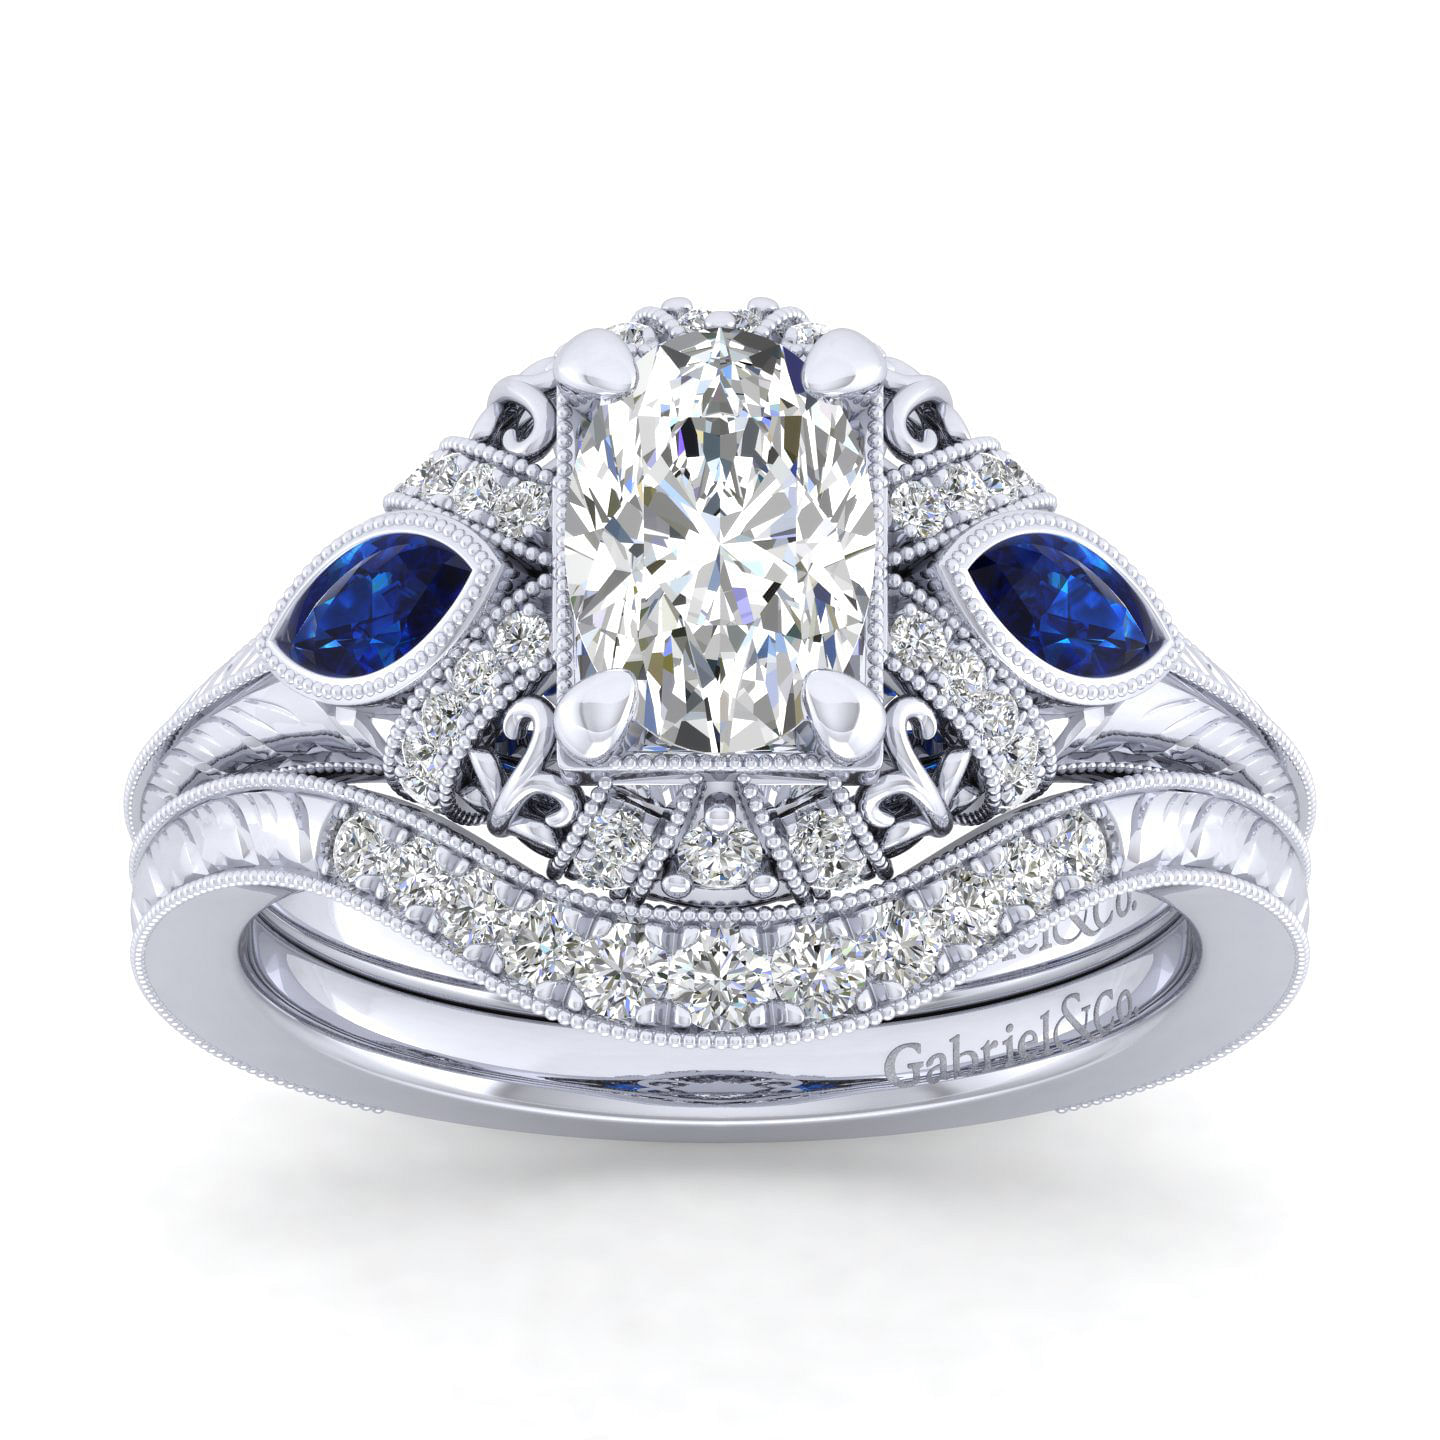 Vintage Inspired 14K White Gold Oval Three Stone Halo Sapphire and Diamond Engagement Ring